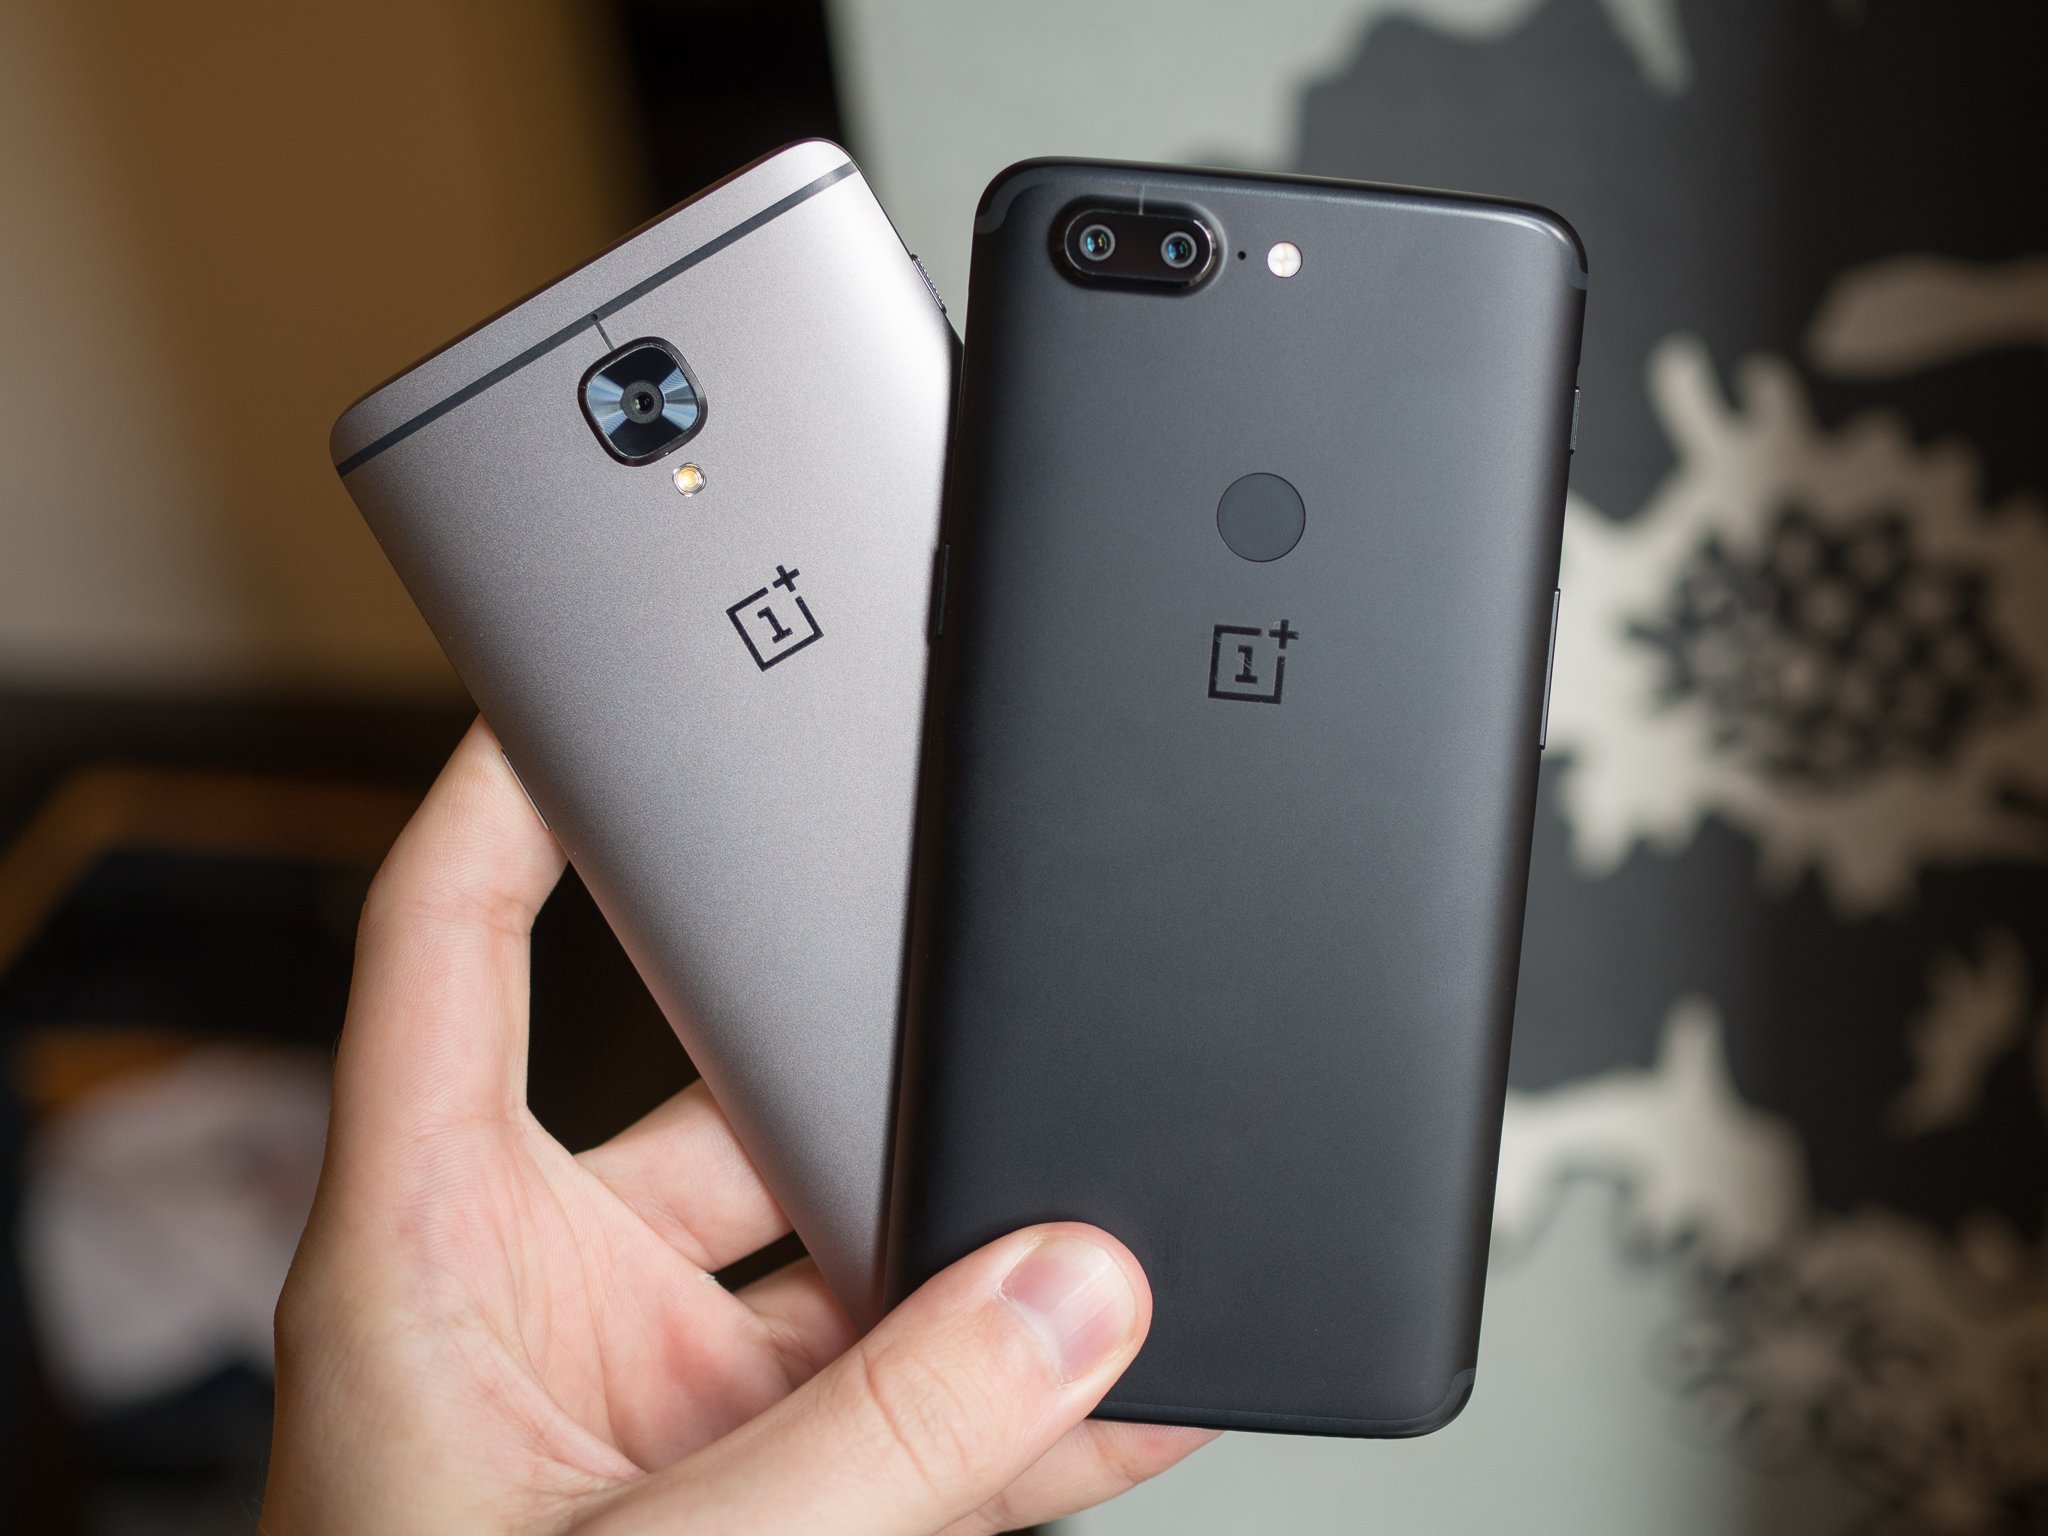 Where can i buy a oneplus 5t